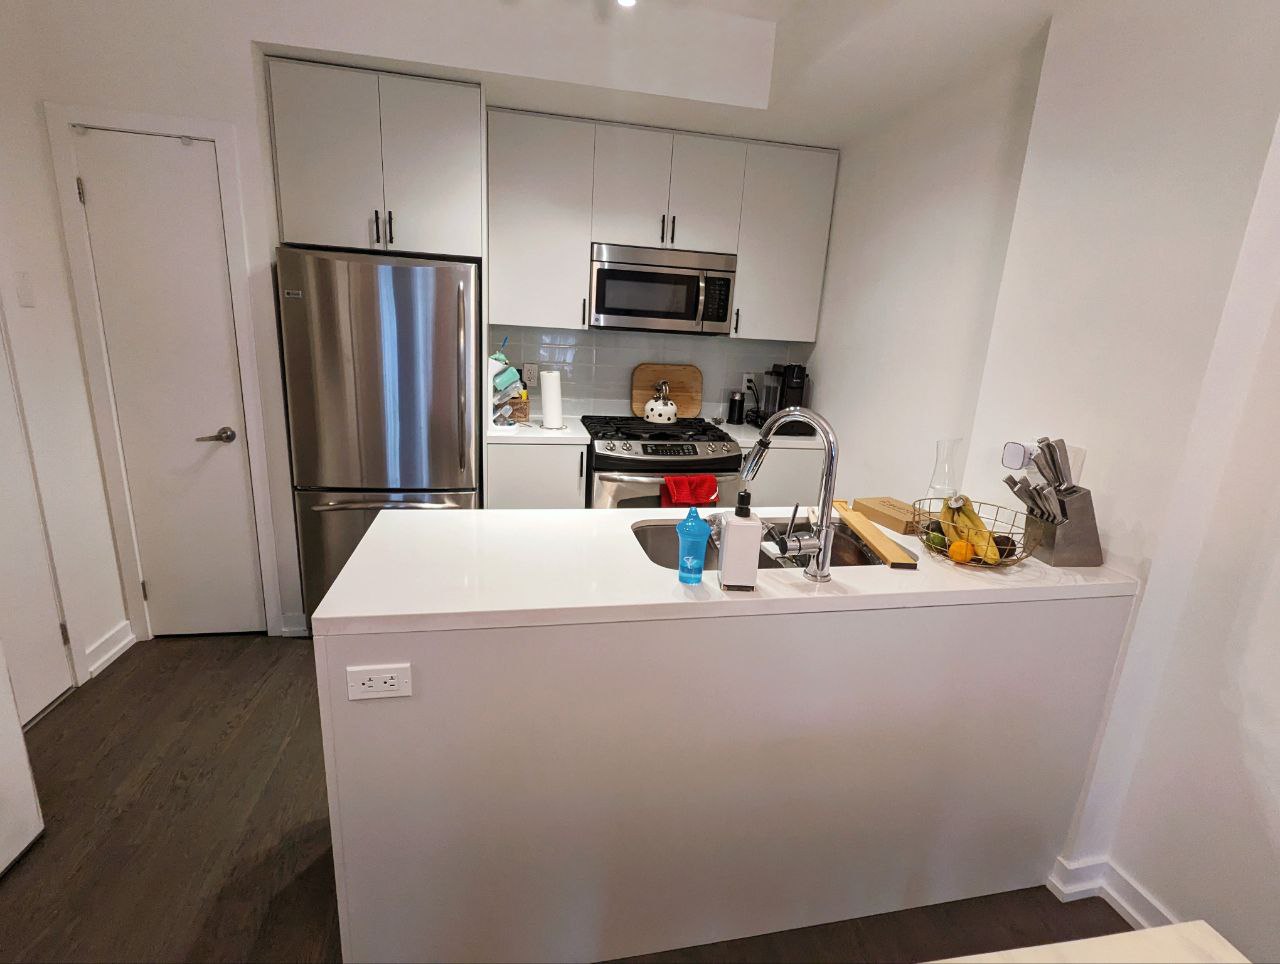 Benjamin Moore Chic Gray Owl kitchen cabinets in a cozy downtown Toronto townhome – a stunning upgrade from high-gloss slab doors. Among three kitchen cabinet paint colors suggested by our in-house color consultant, this is the client's choice and we both love it!